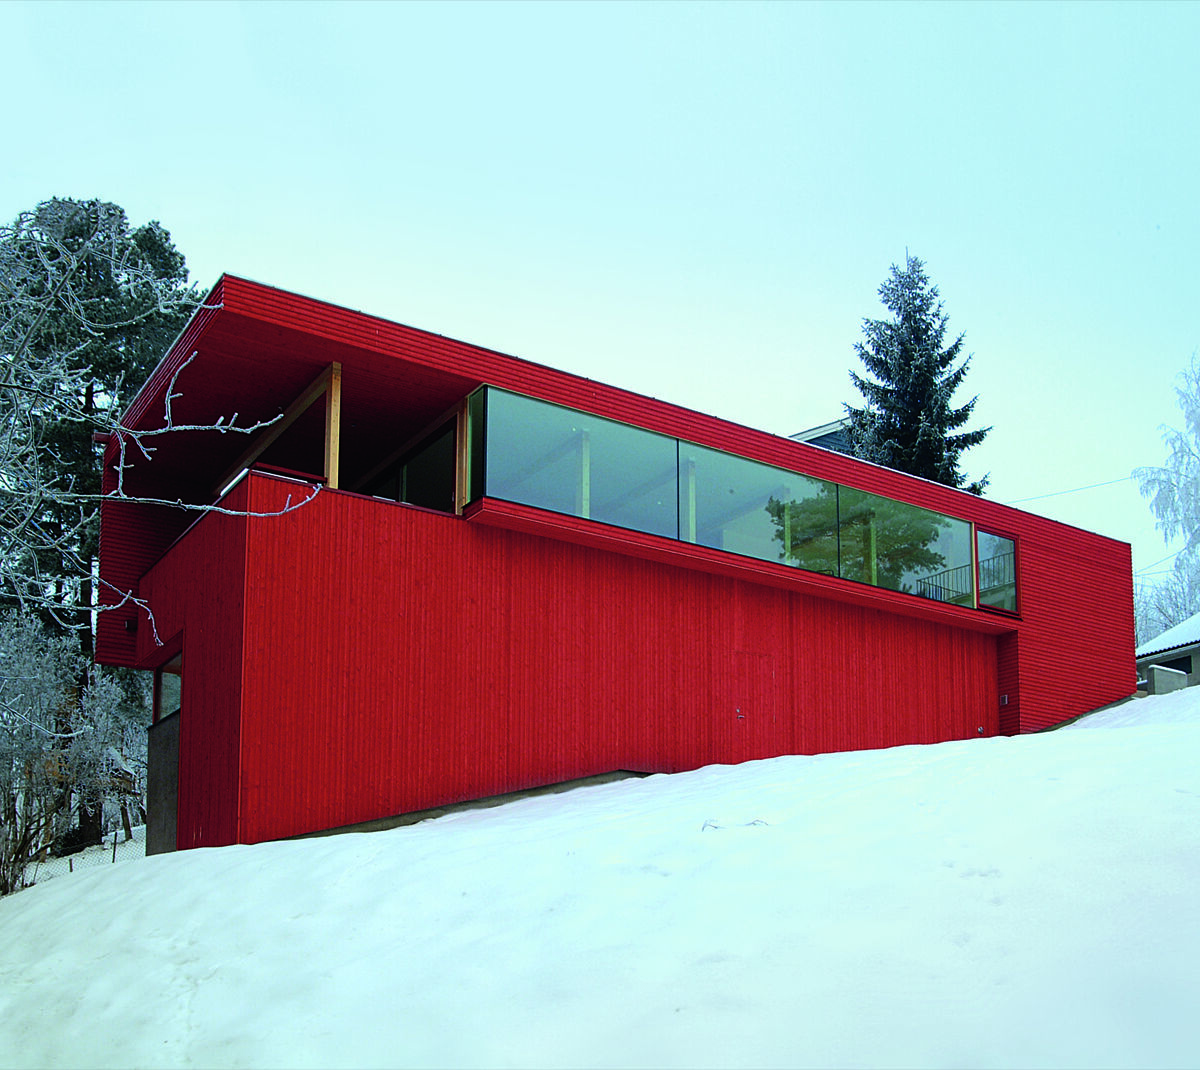 Jarmund/Vigsnæs Arkitekter, The Red House, 2002, Oslo, Norway. Photo by Nils Petter Dale. Courtesy of Phaidon.